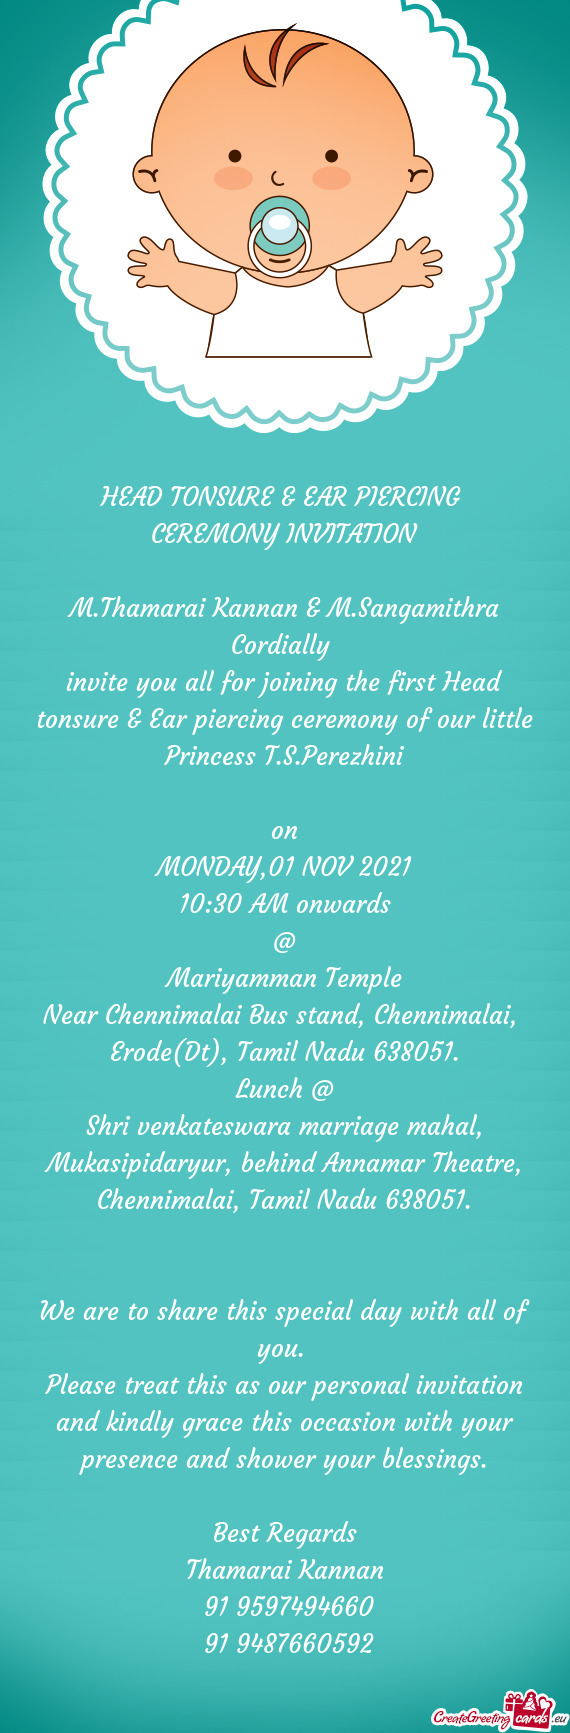 Invite you all for joining the first Head tonsure & Ear piercing ceremony of our little Princess T.S